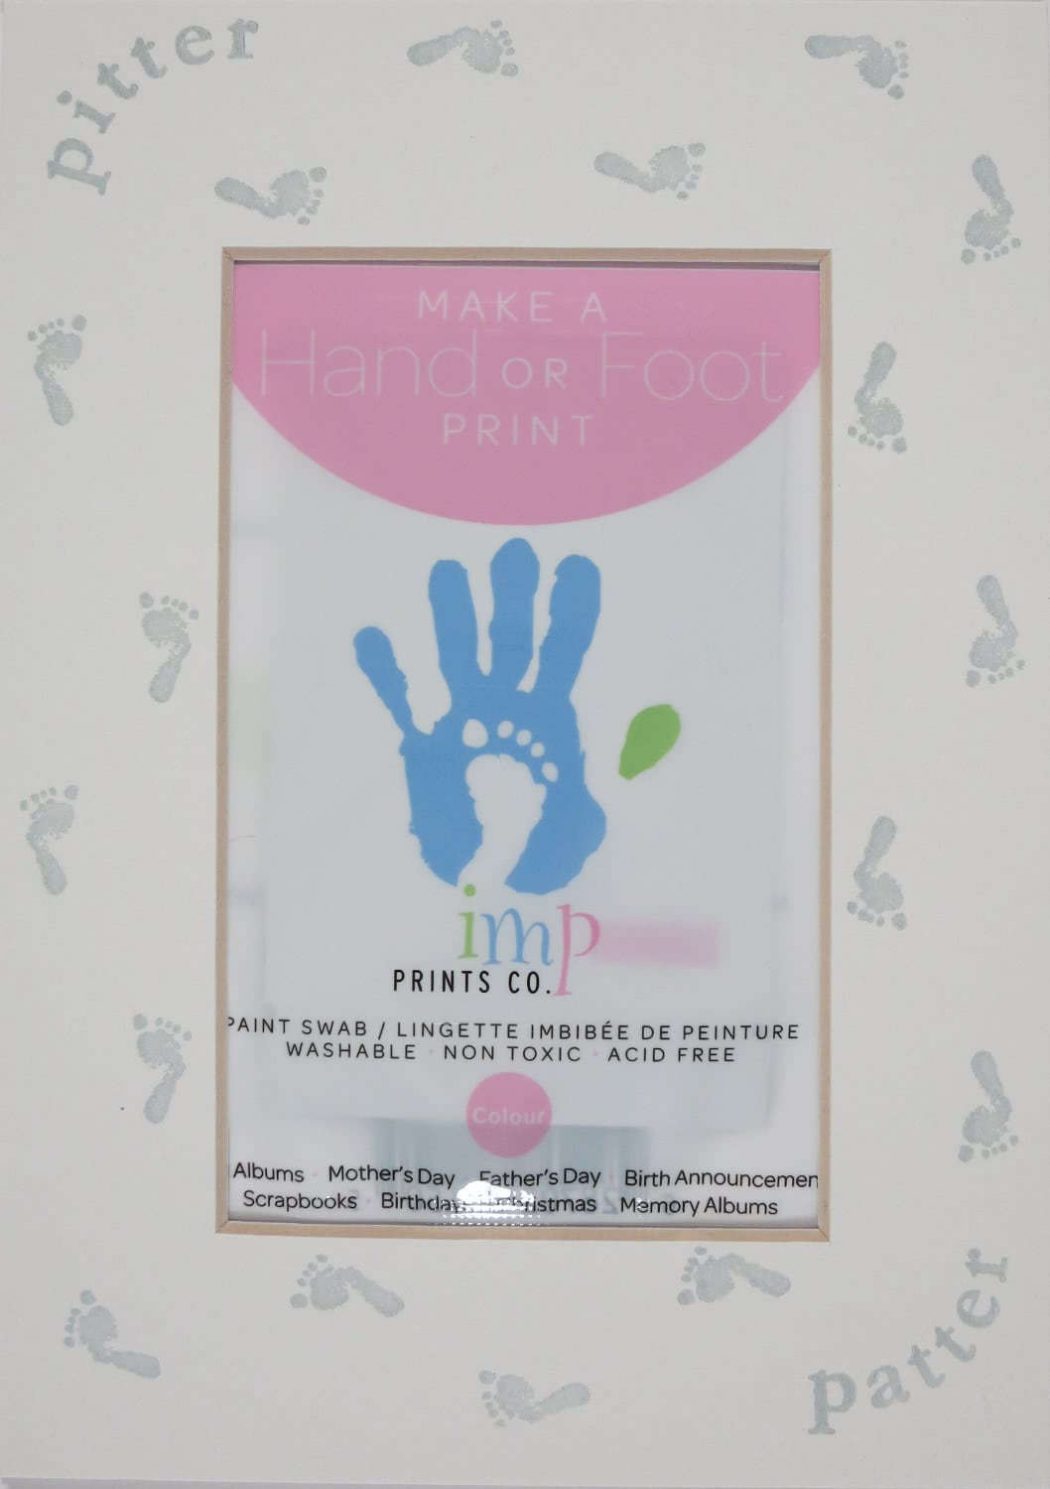 Imp Prints Co keepsakes for parents Footprint Matt, Printed with little footprints around the opening, including the included pink paint swab